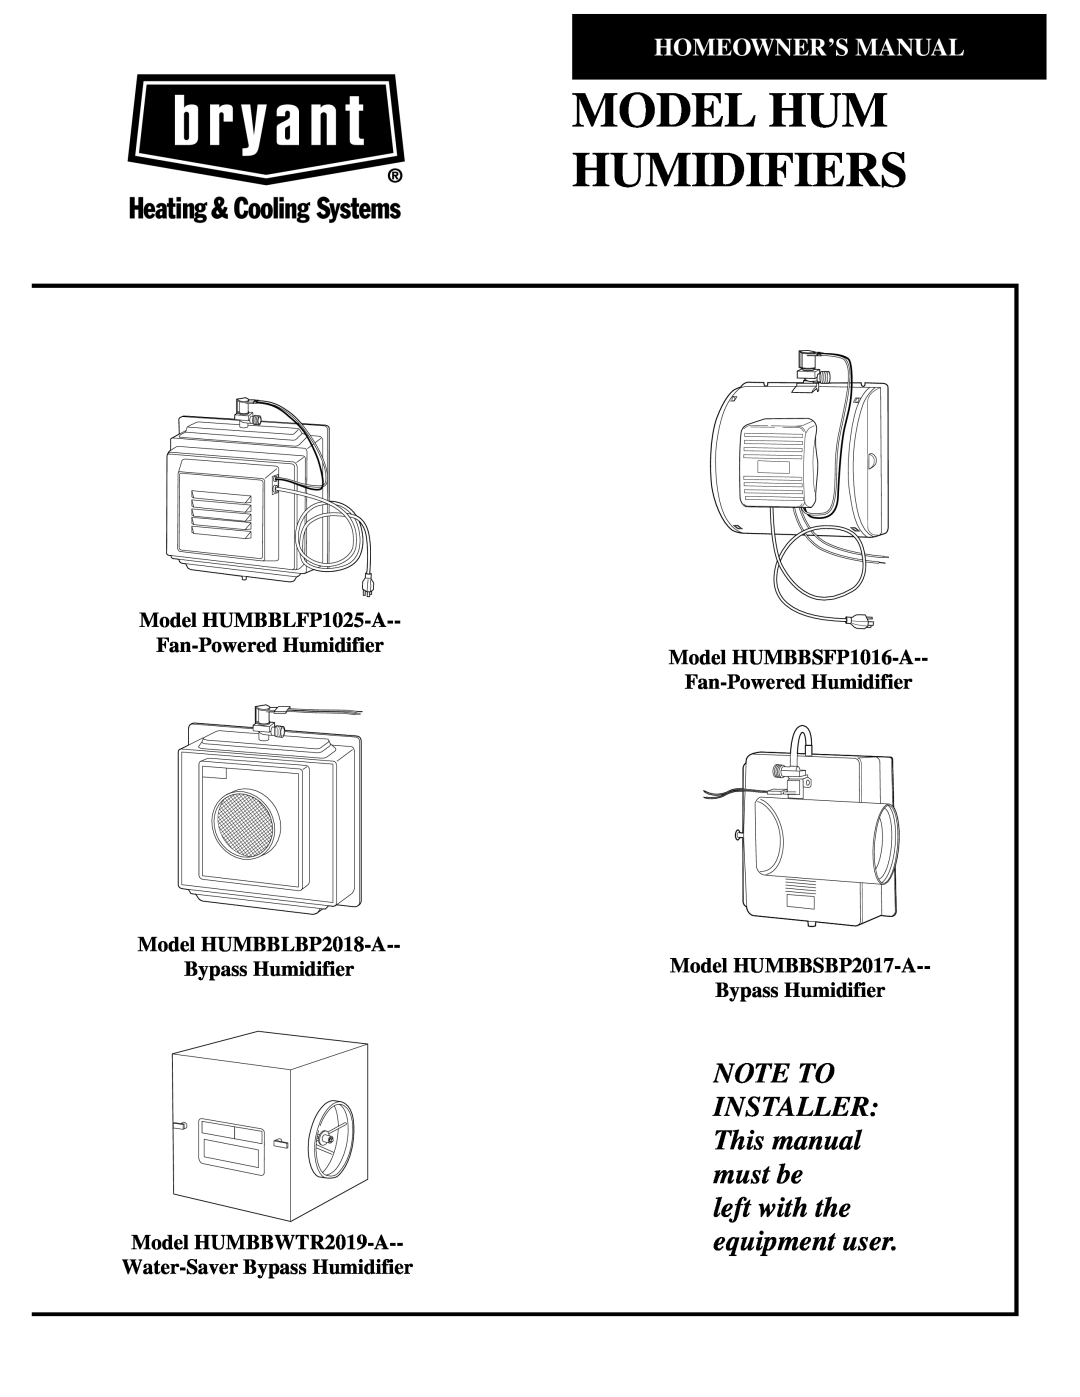 Bryant HUMBBBP2018-A owner manual Model Hum Humidifiers, NOTE TO INSTALLER This manual must be left with the 